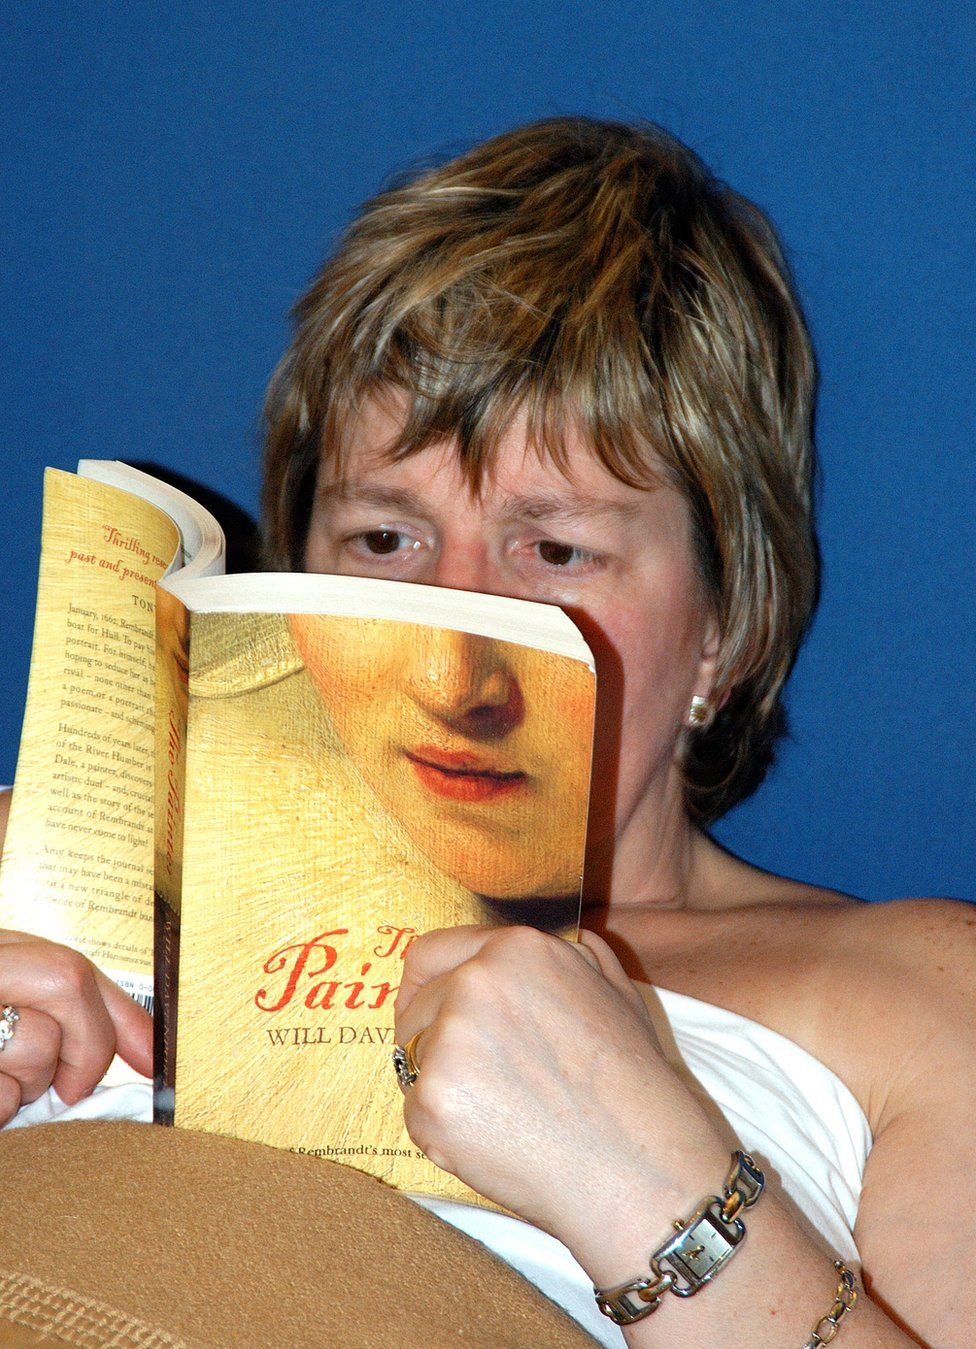 A woman reads her book